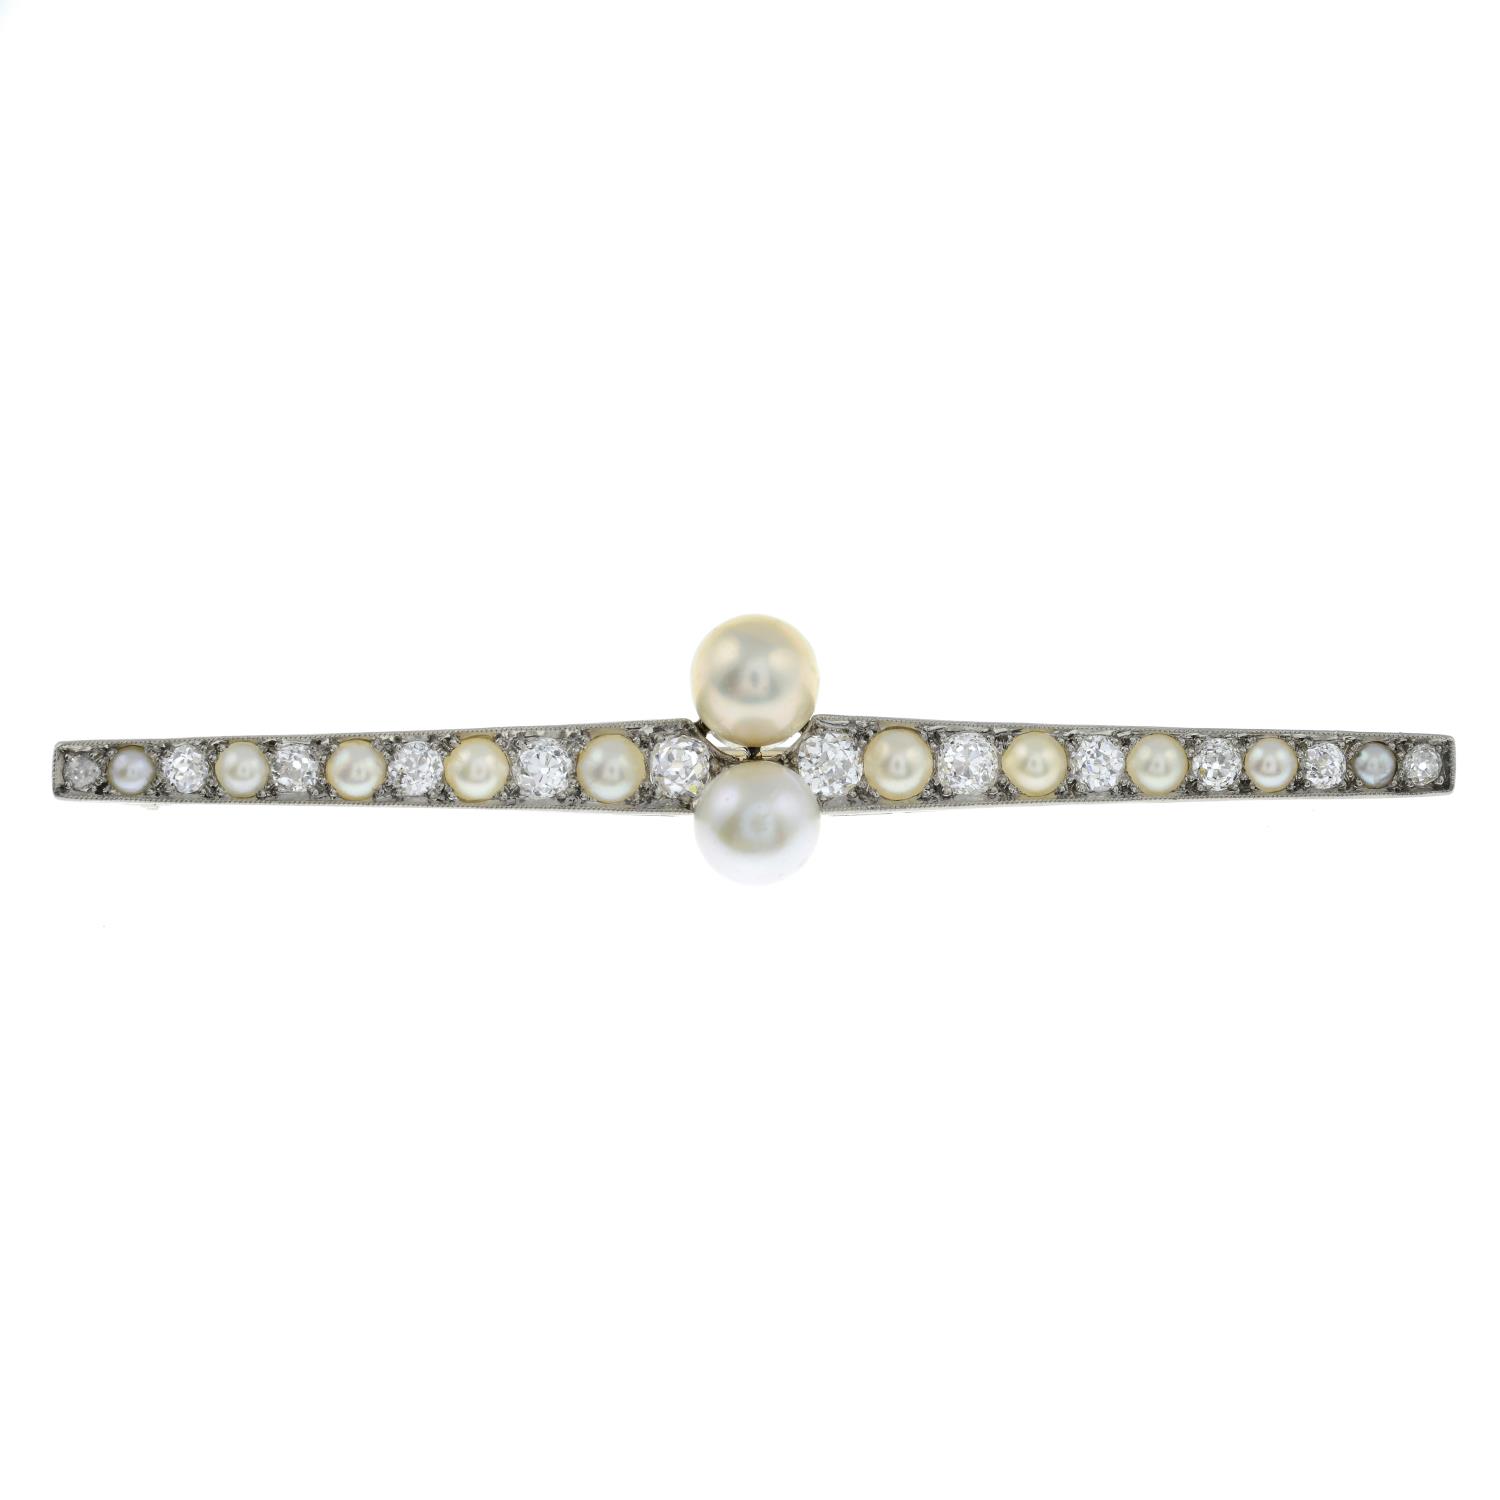 An early 20th century 18ct gold pearl, - Image 2 of 4